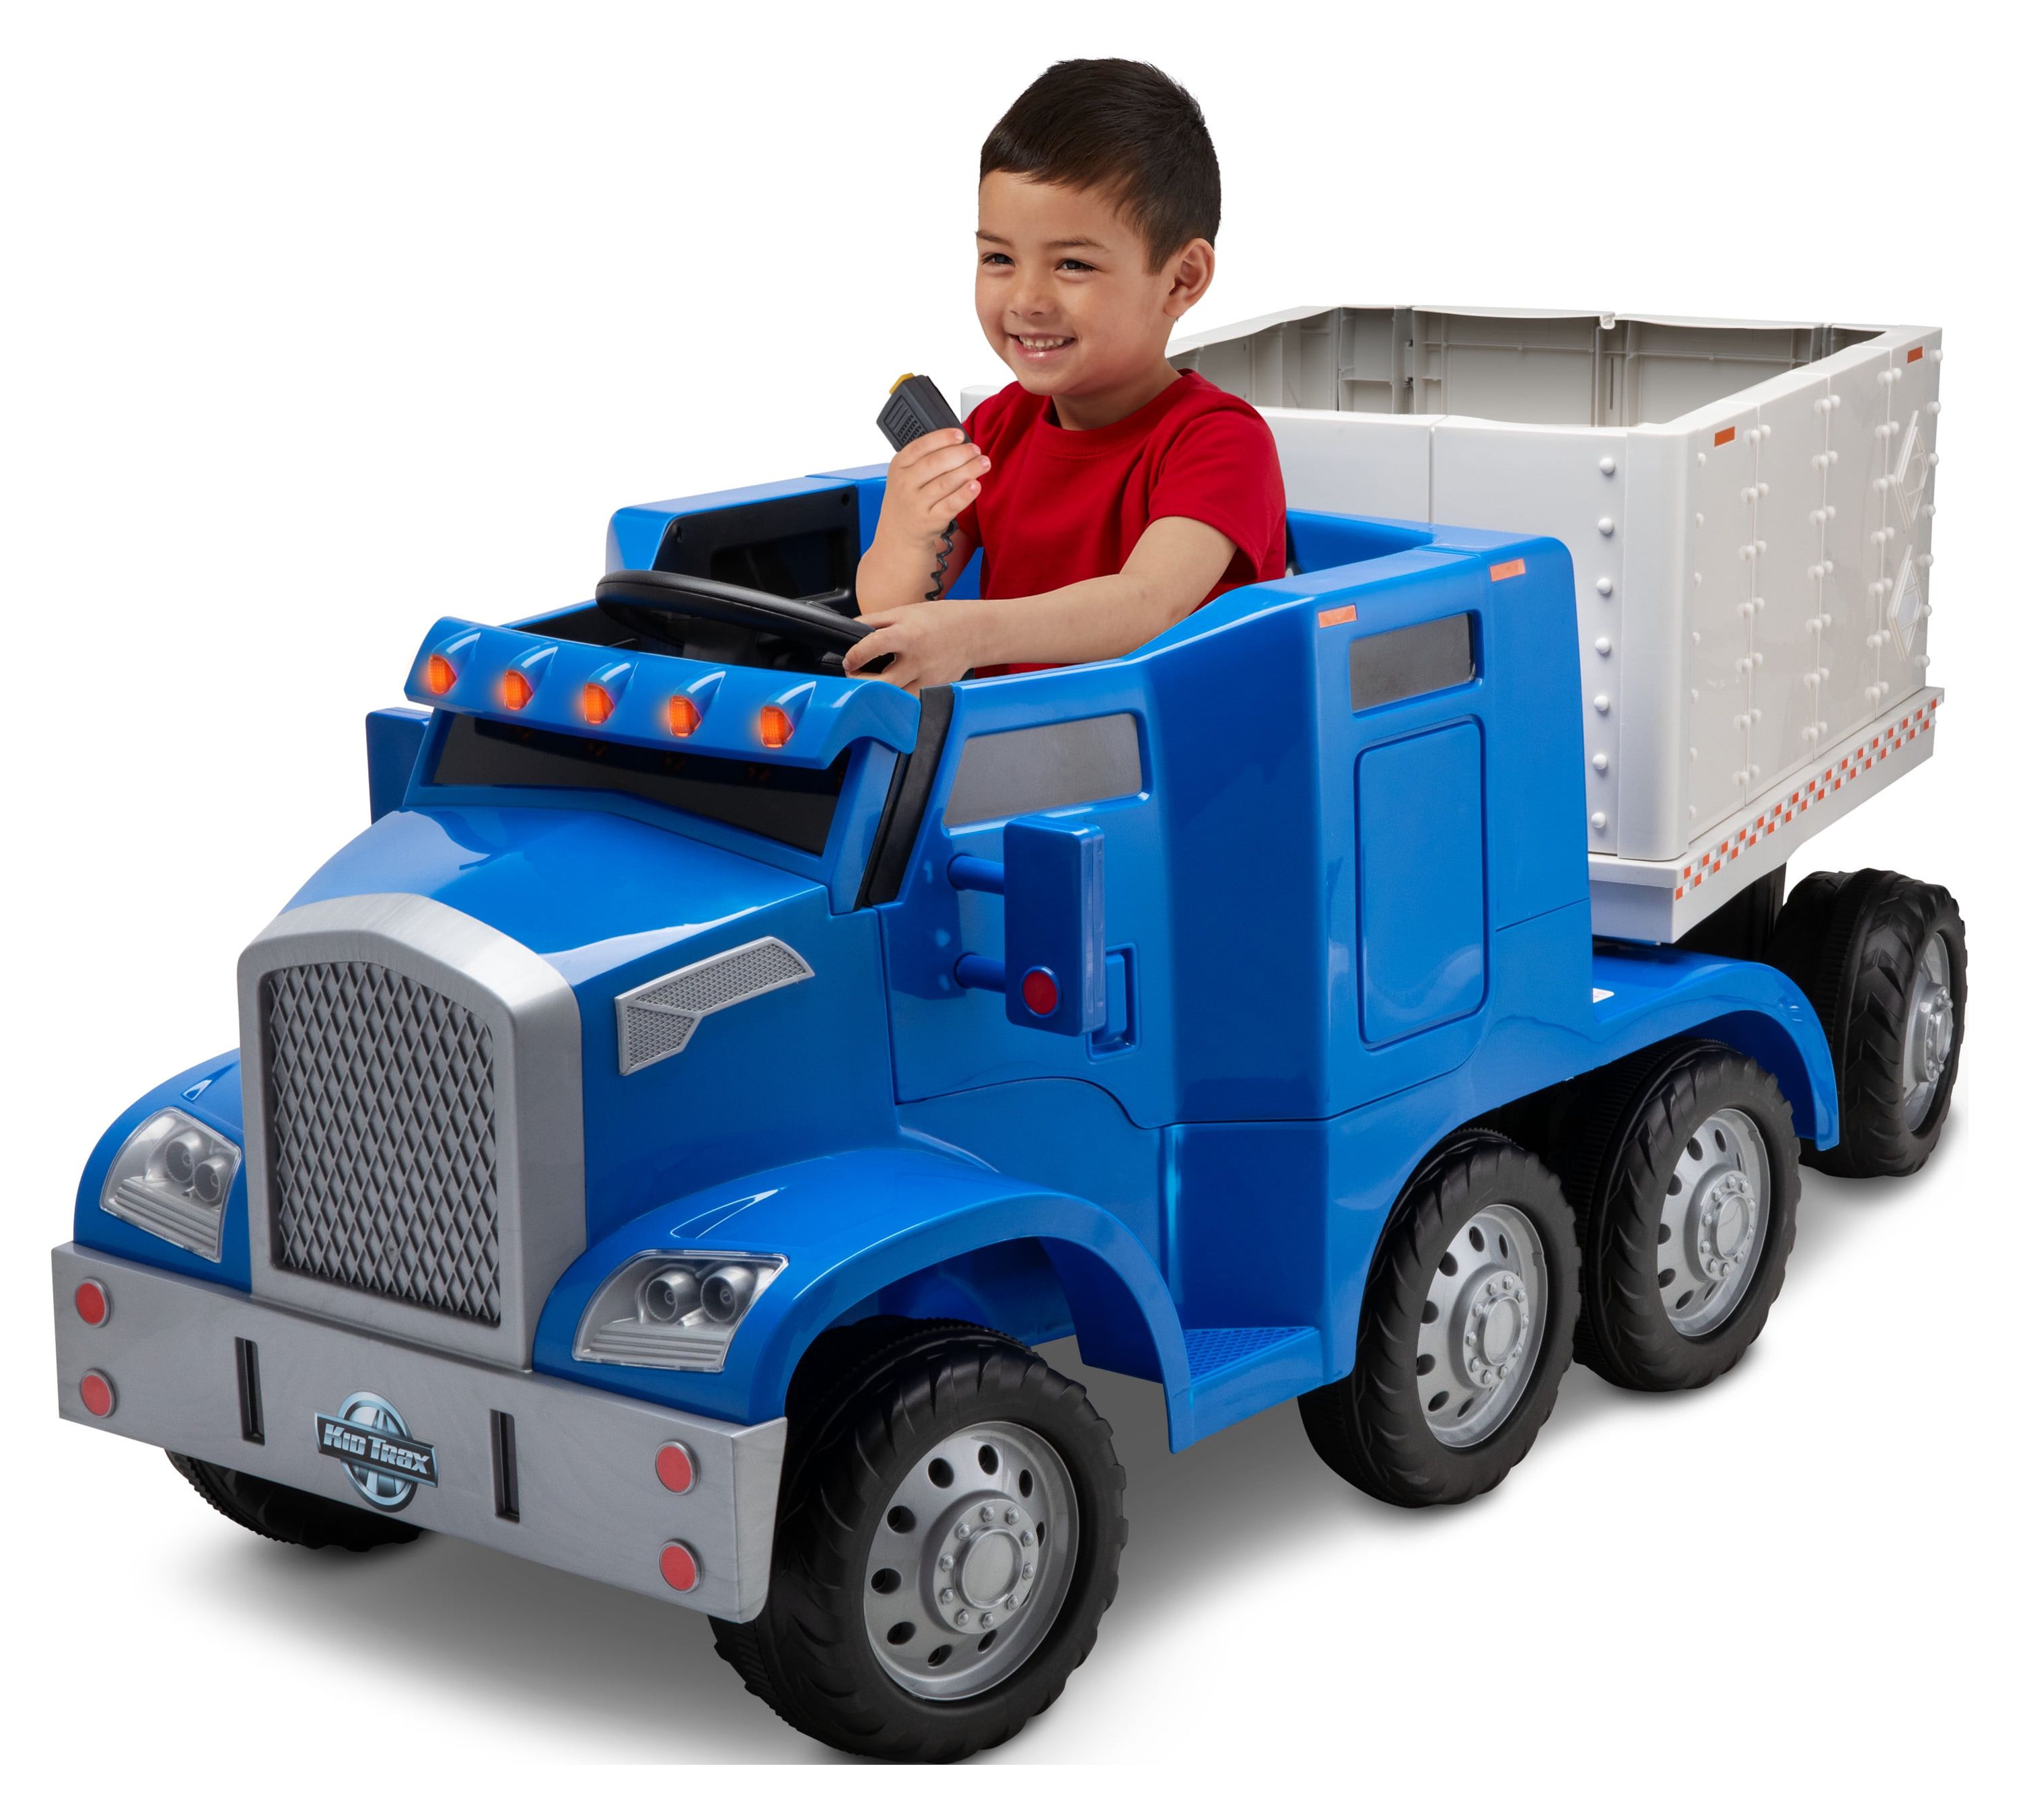 Kid Trax Semi-Truck and Trailer Ride-On Toy, Blue - image 1 of 10